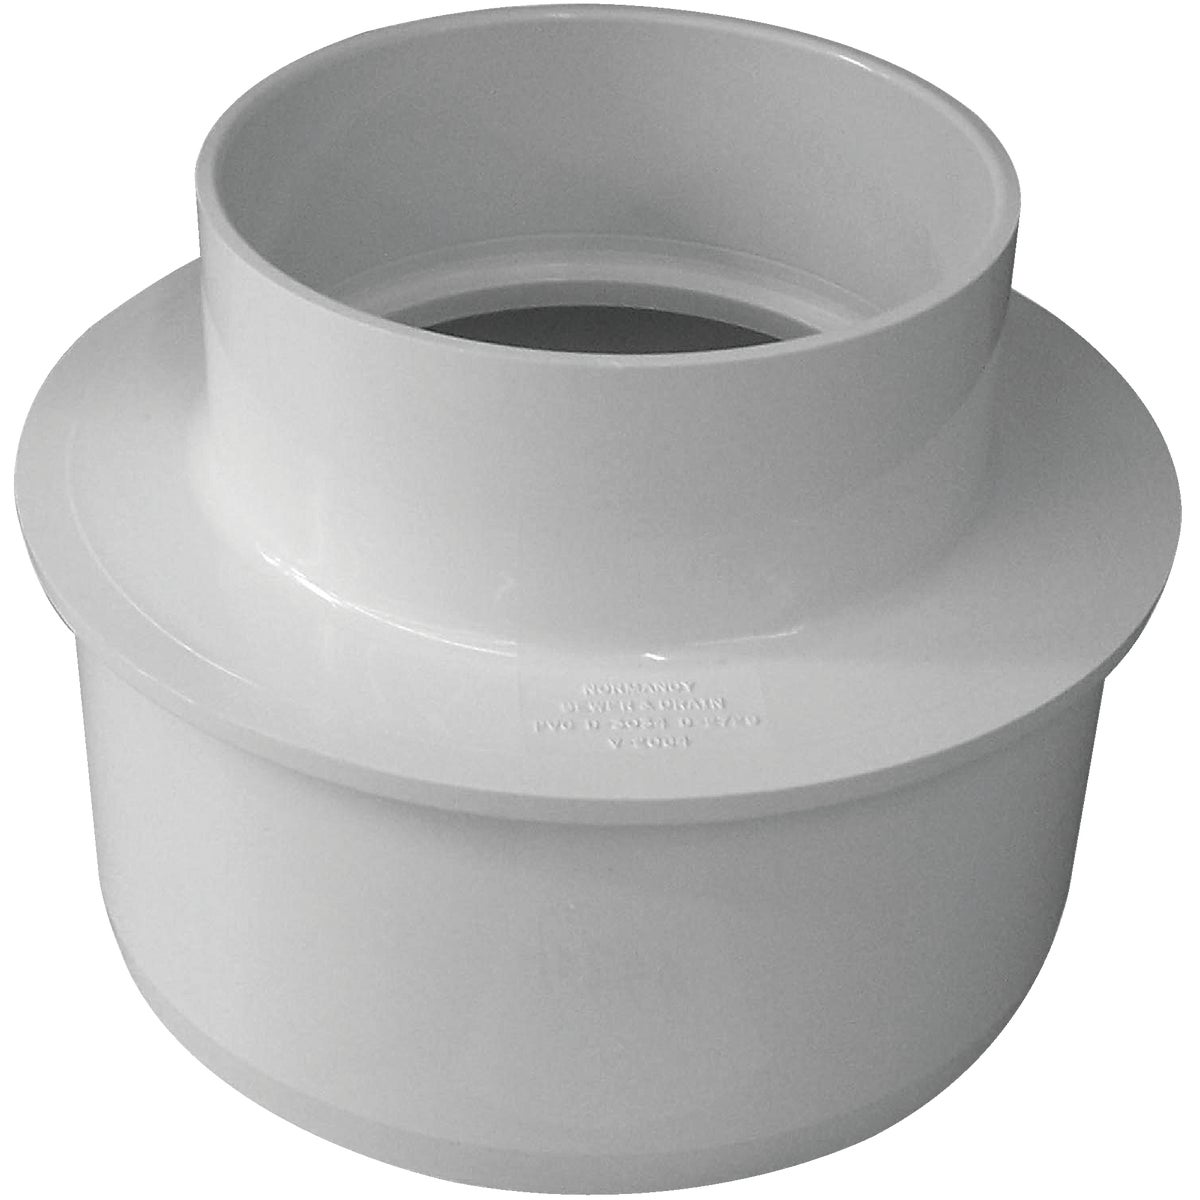 IPEX Canplas SDR 35 6 In. x 4 In. PVC Sewer and Drain Reducer Bushing